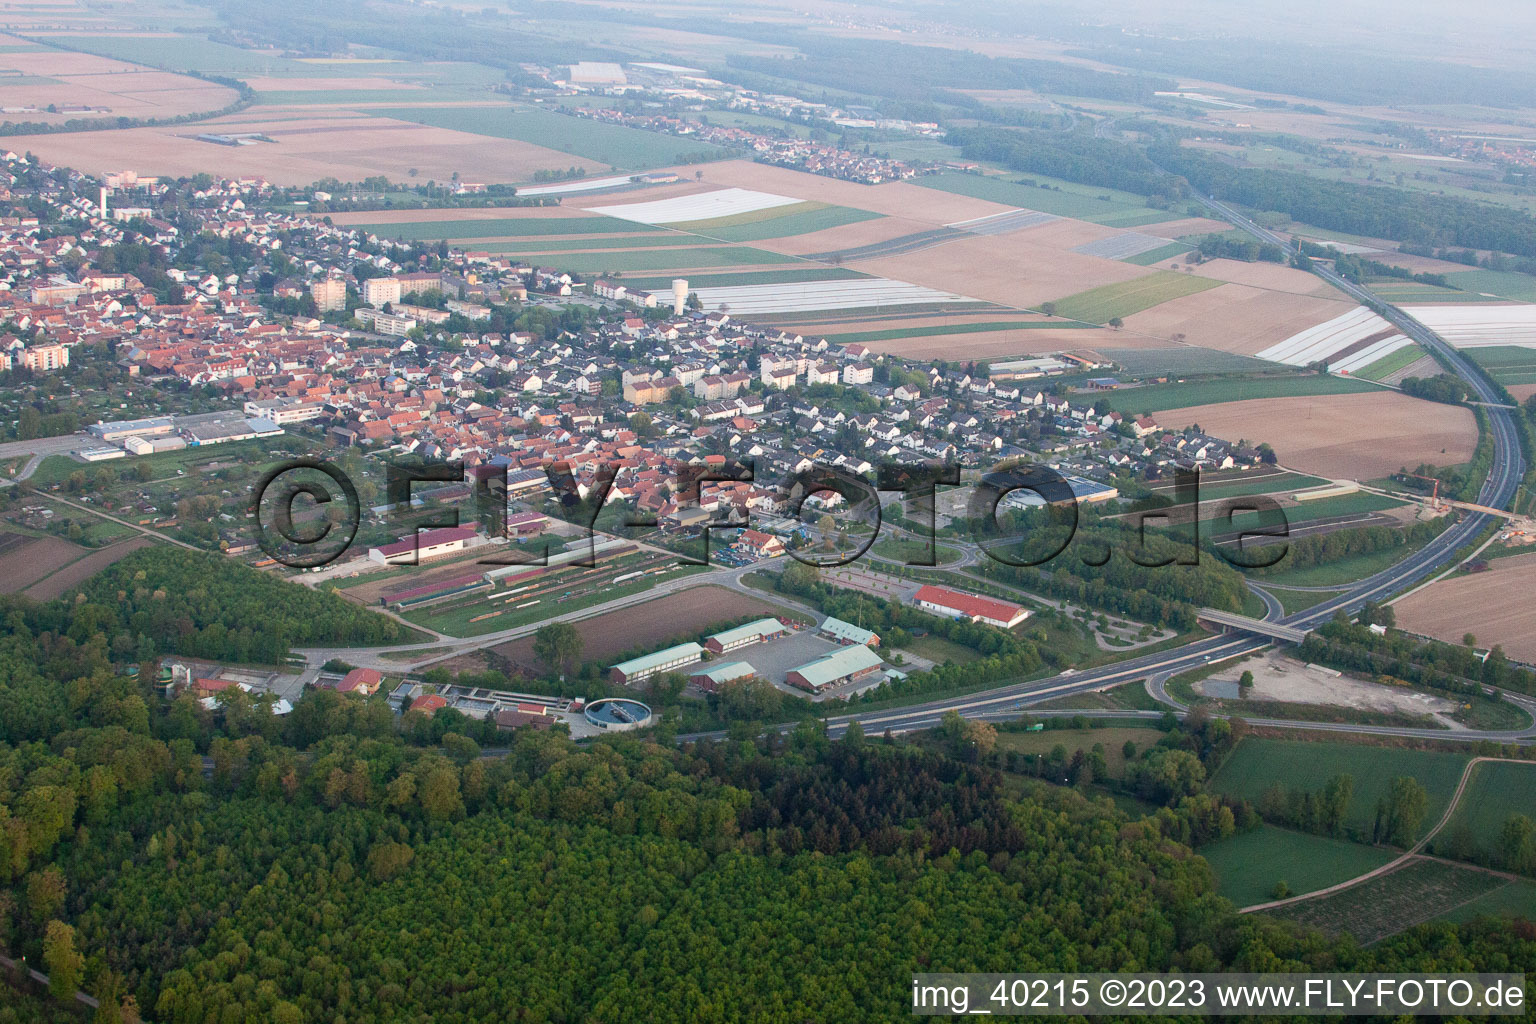 From the east in Kandel in the state Rhineland-Palatinate, Germany seen from above